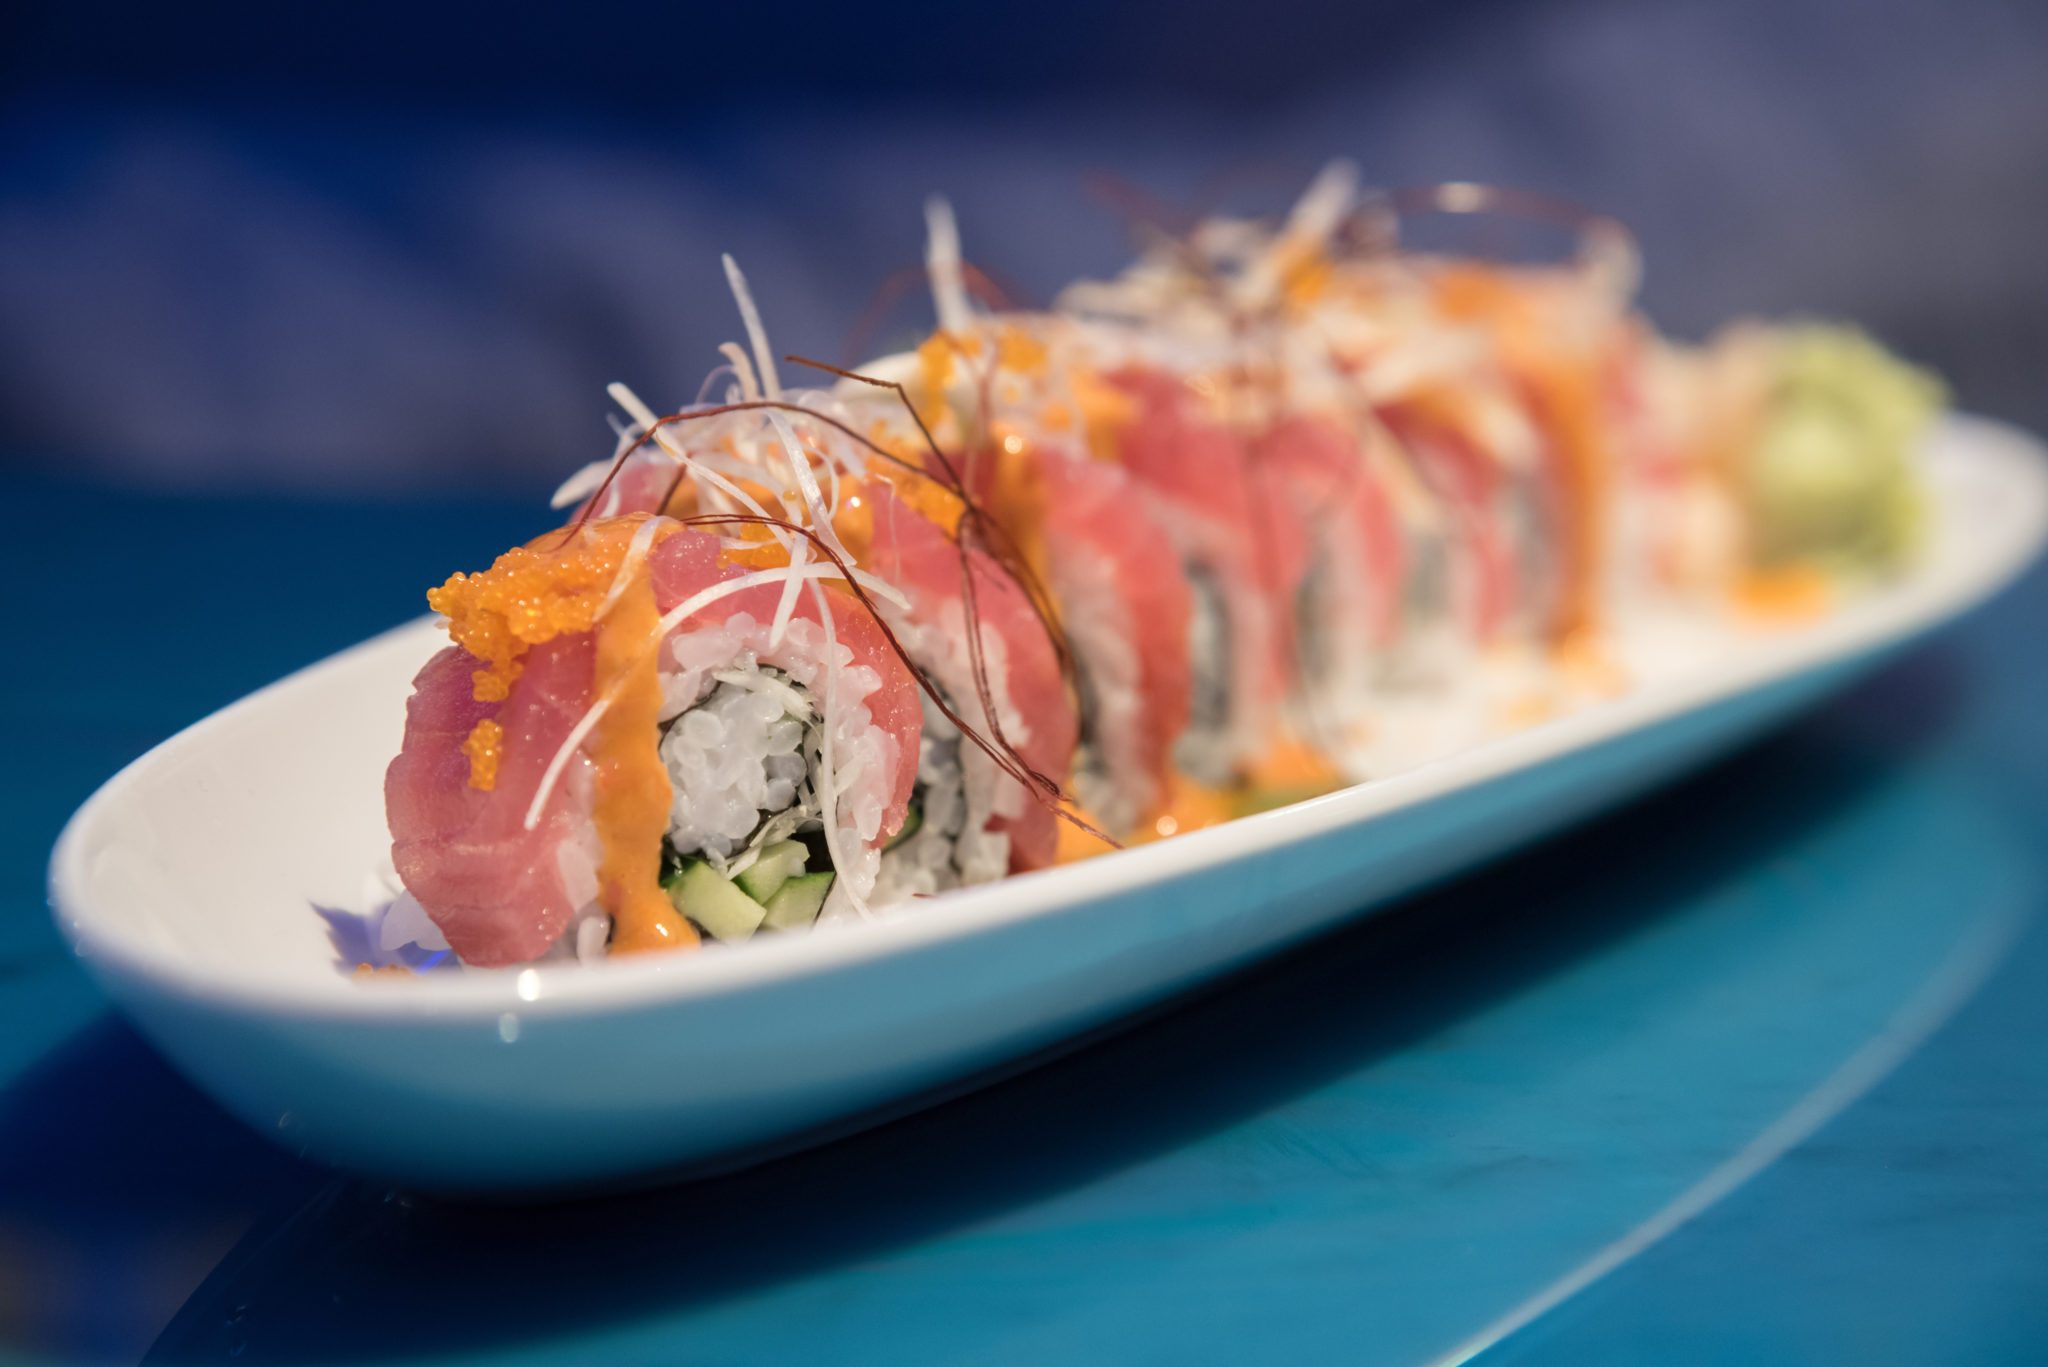 Sushi has strongly entered the gastronomic offer of some of our restaurants. From the most traditional hosomakis to the latest trends in sushi-fusion. Don't hold back!